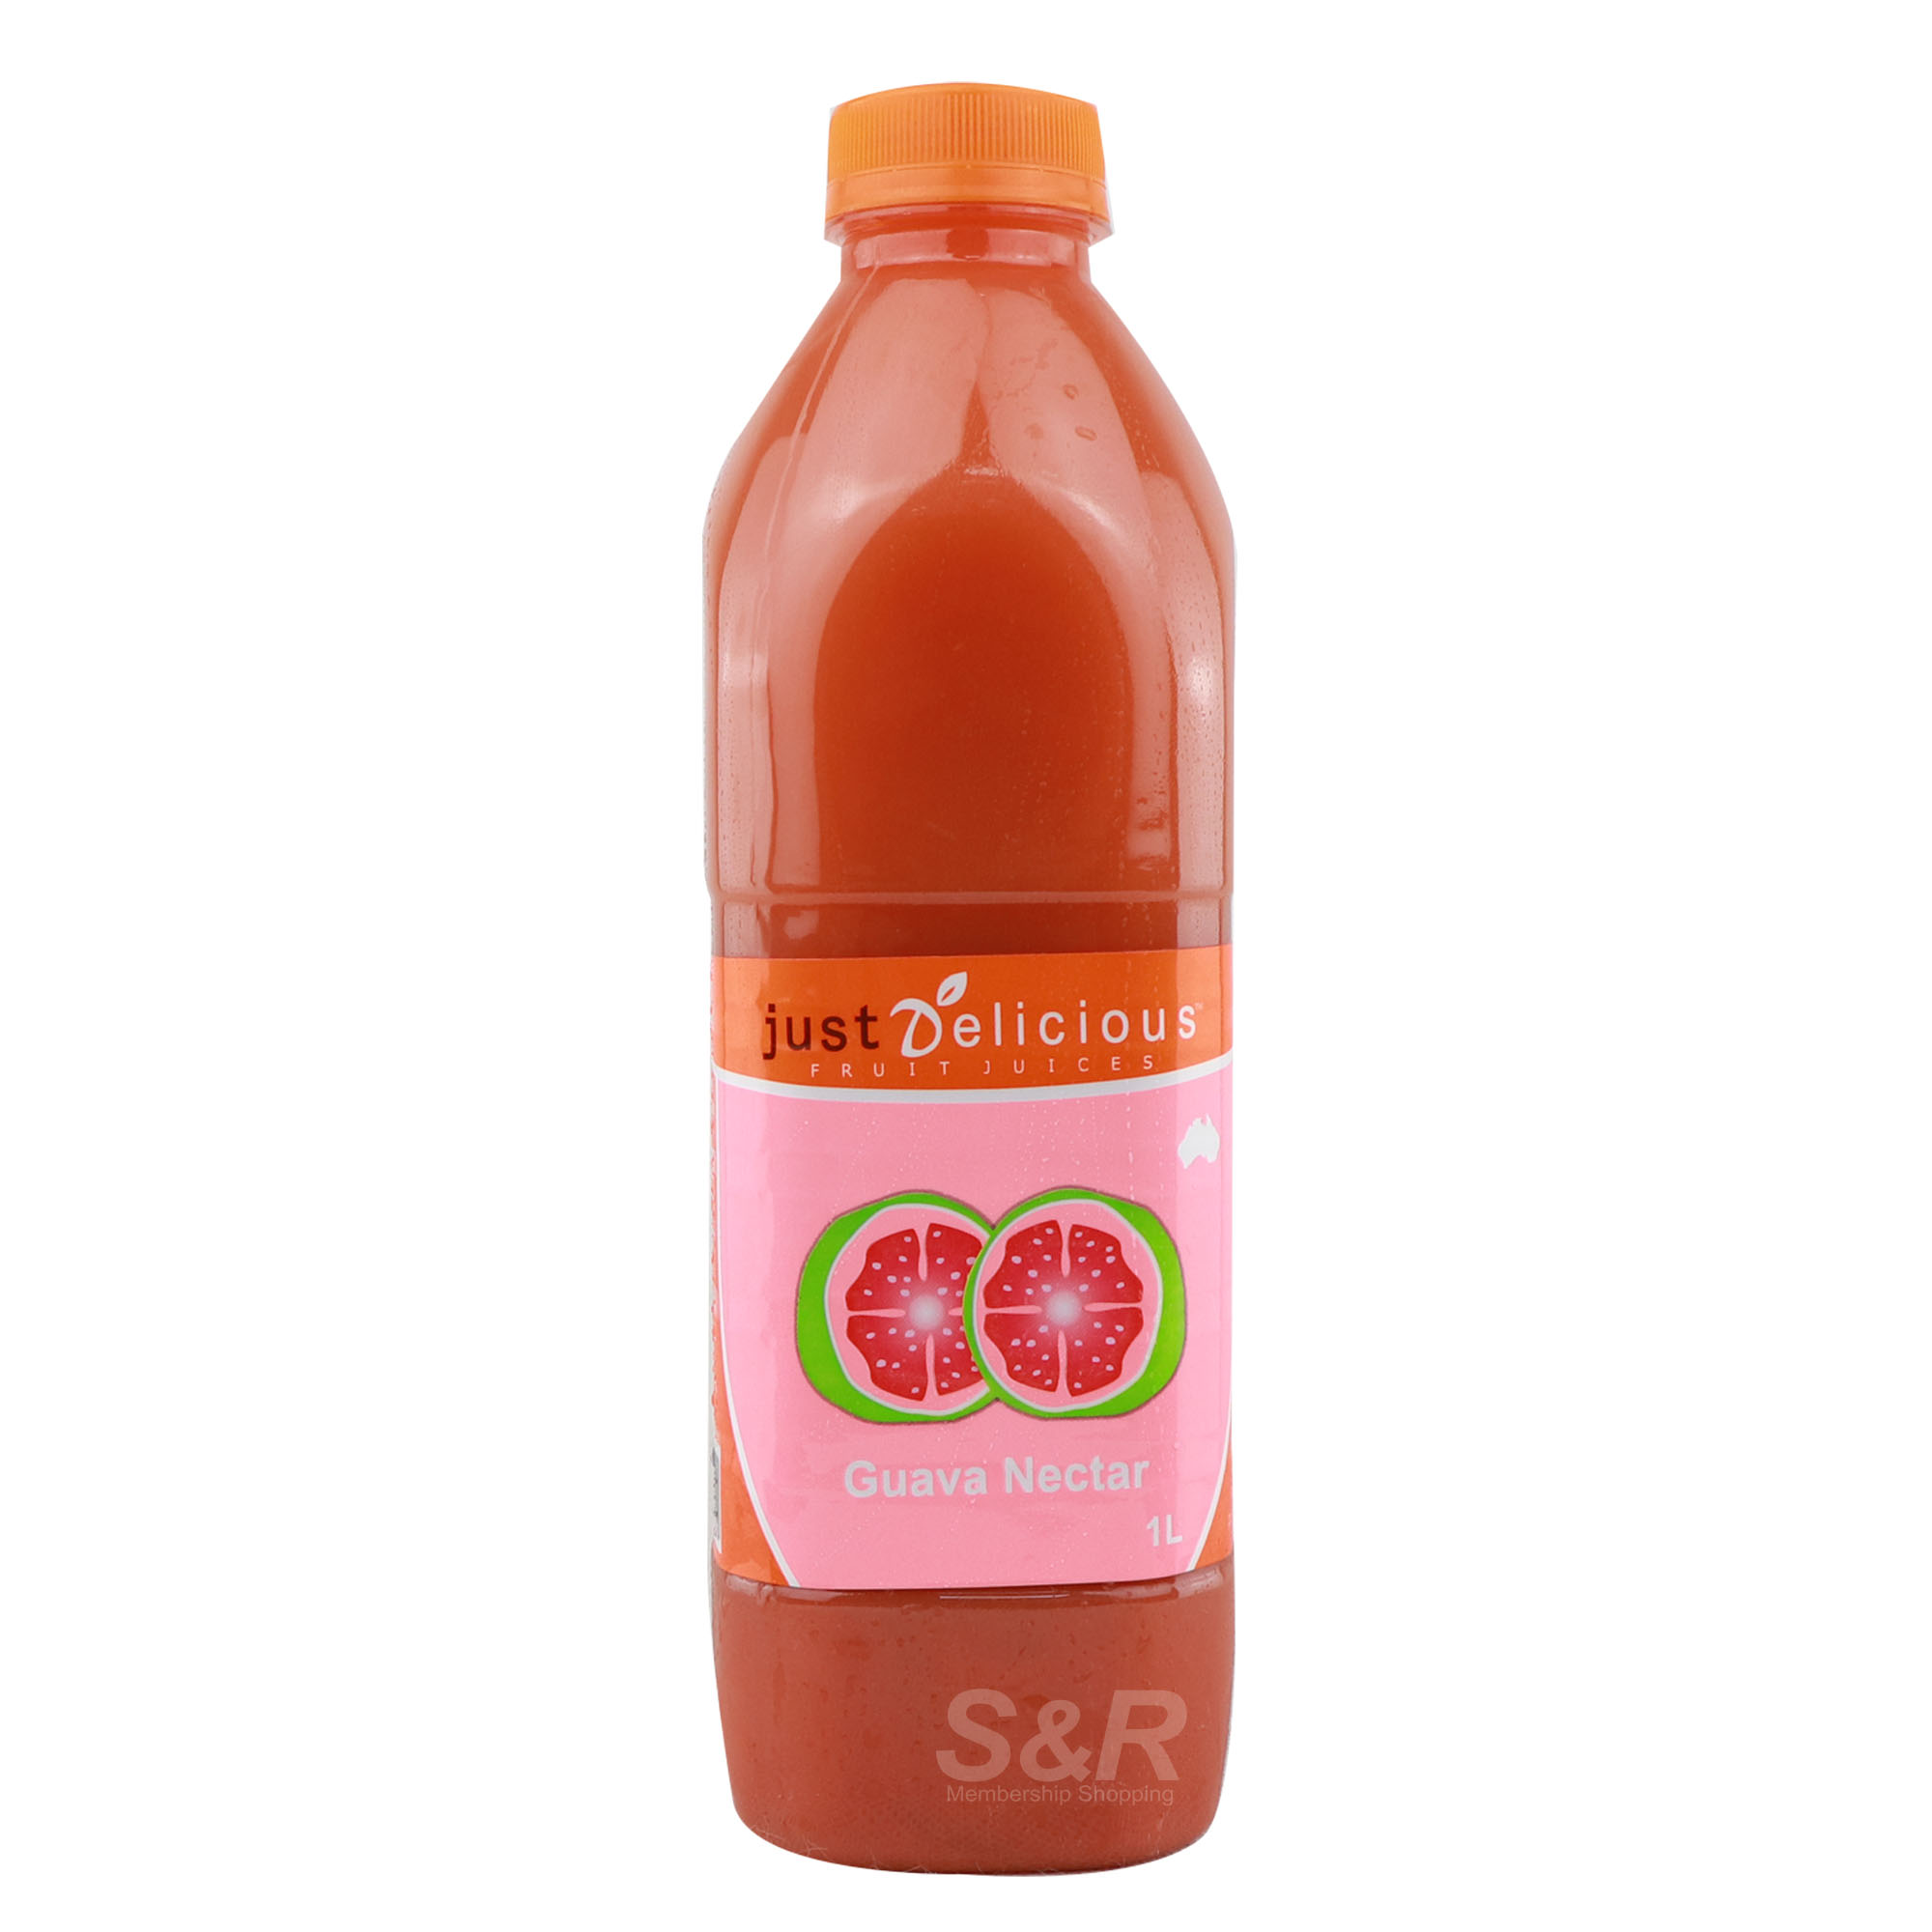 Just Delicious Guava Nectar 1L